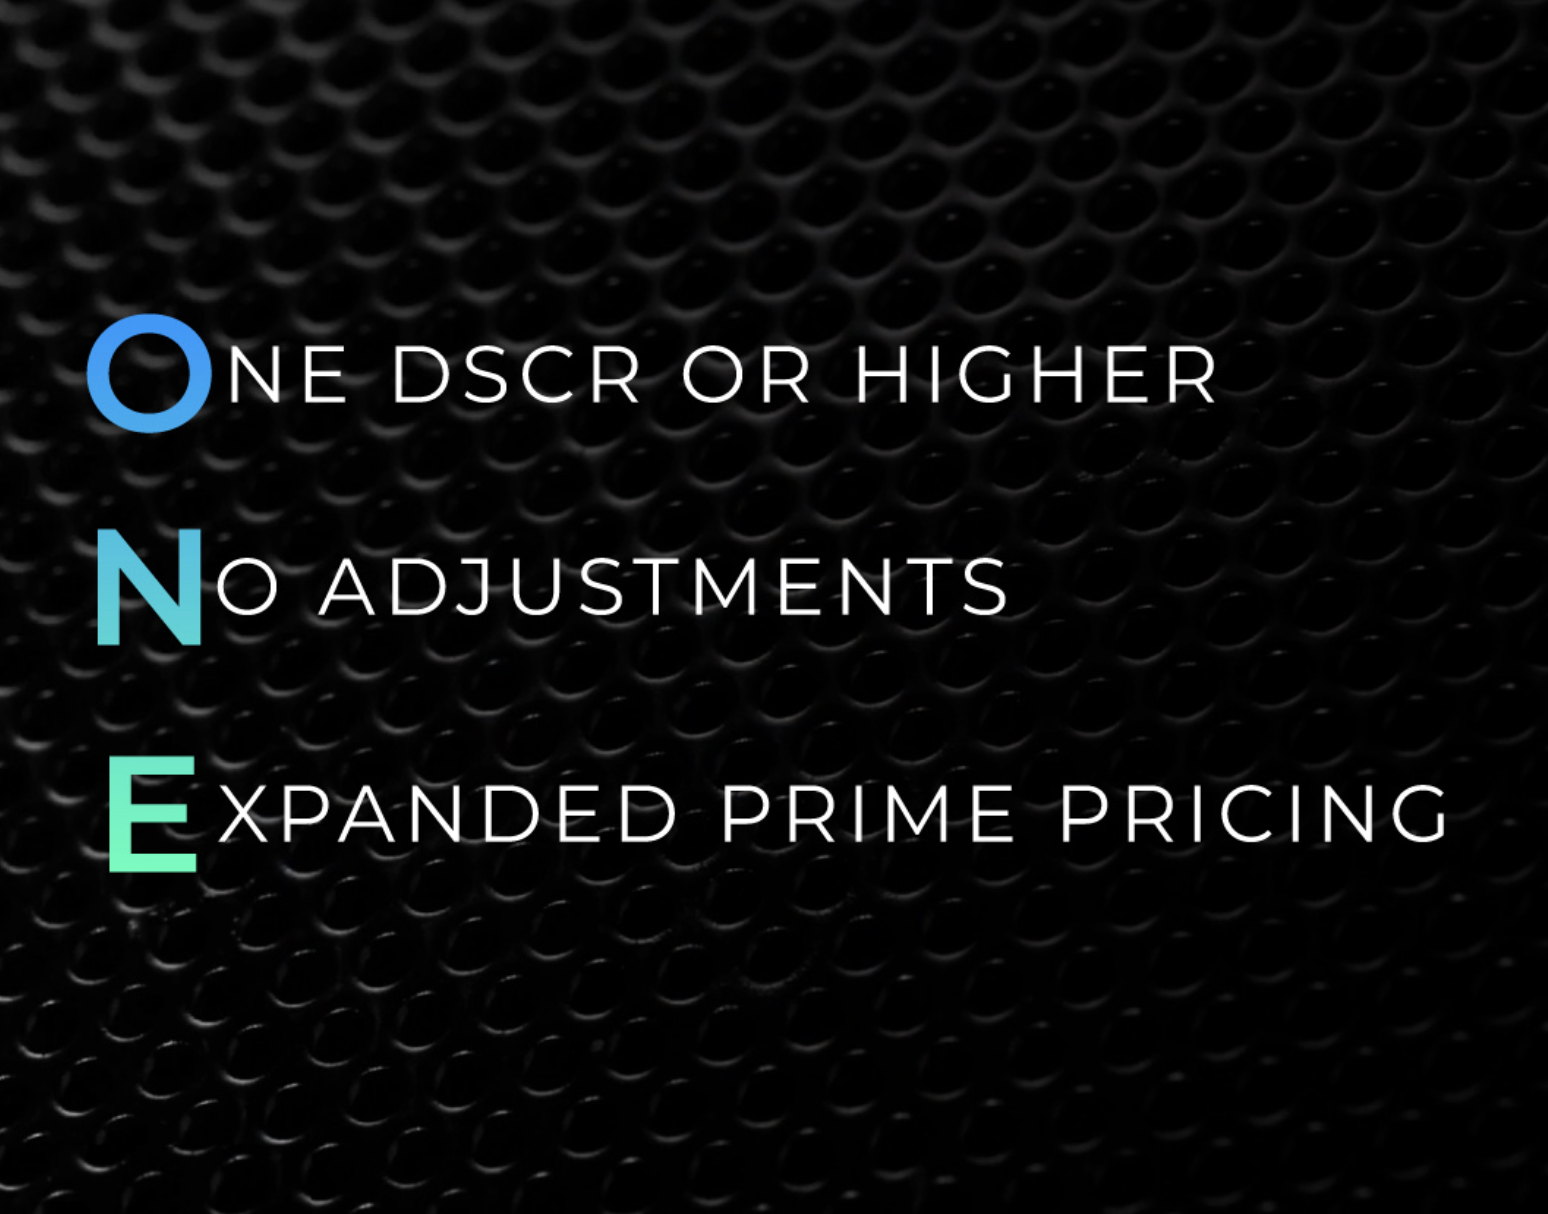 ONE stands for one DSCR, no adjustments, and expanded prime pricing